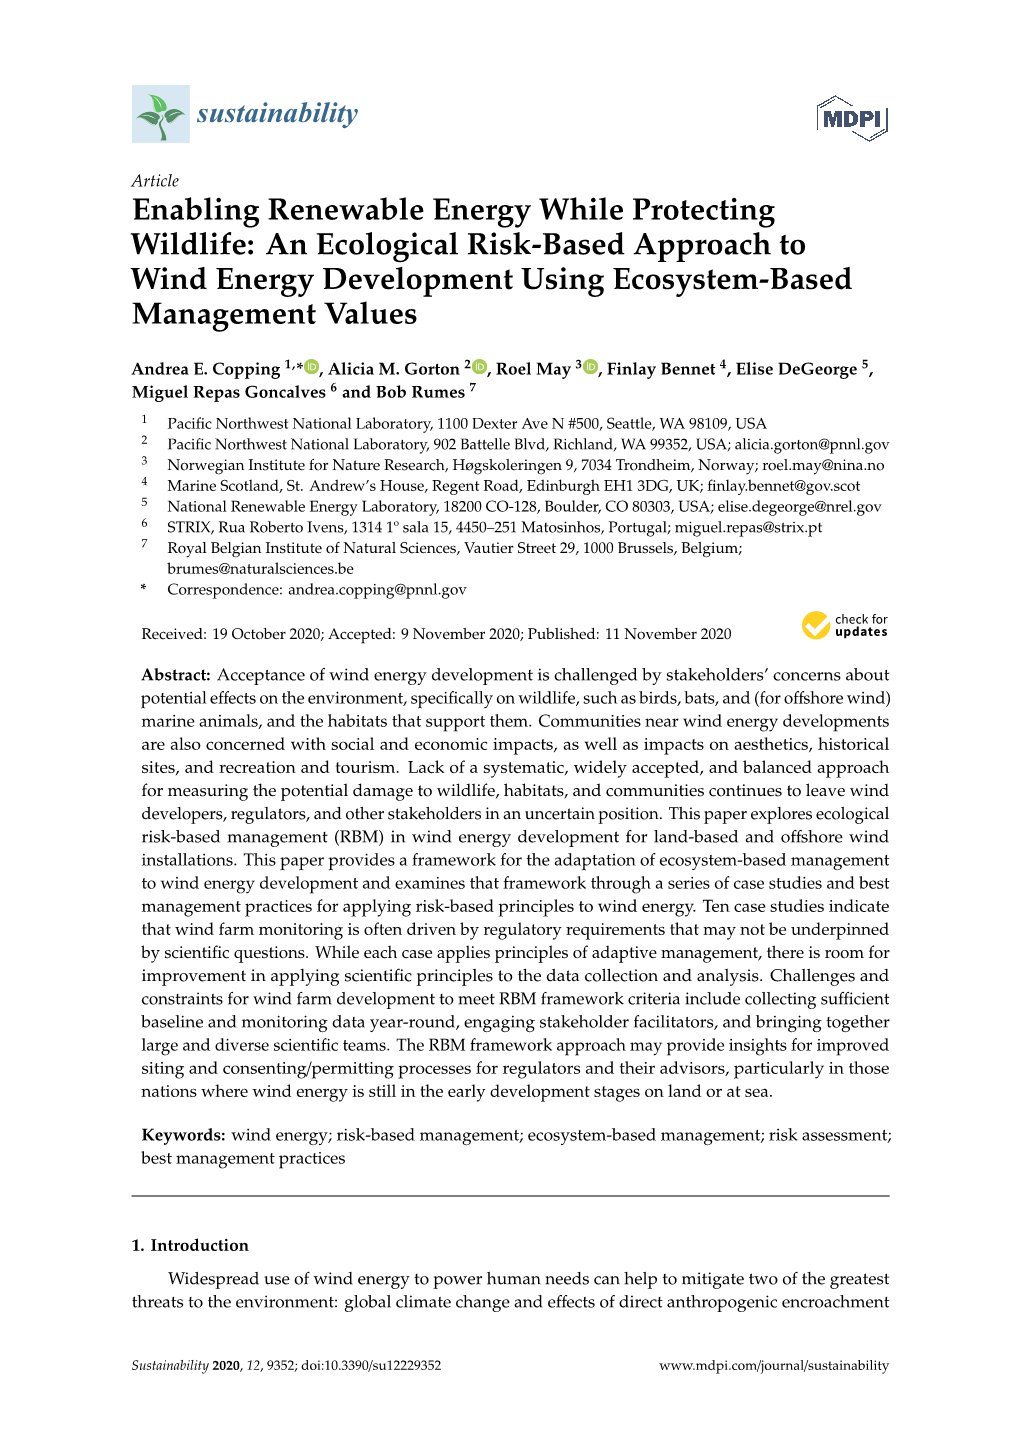 Enabling Renewable Energy While Protecting Wildlife: an Ecological Risk-Based Approach to Wind Energy Development Using Ecosystem-Based Management Values